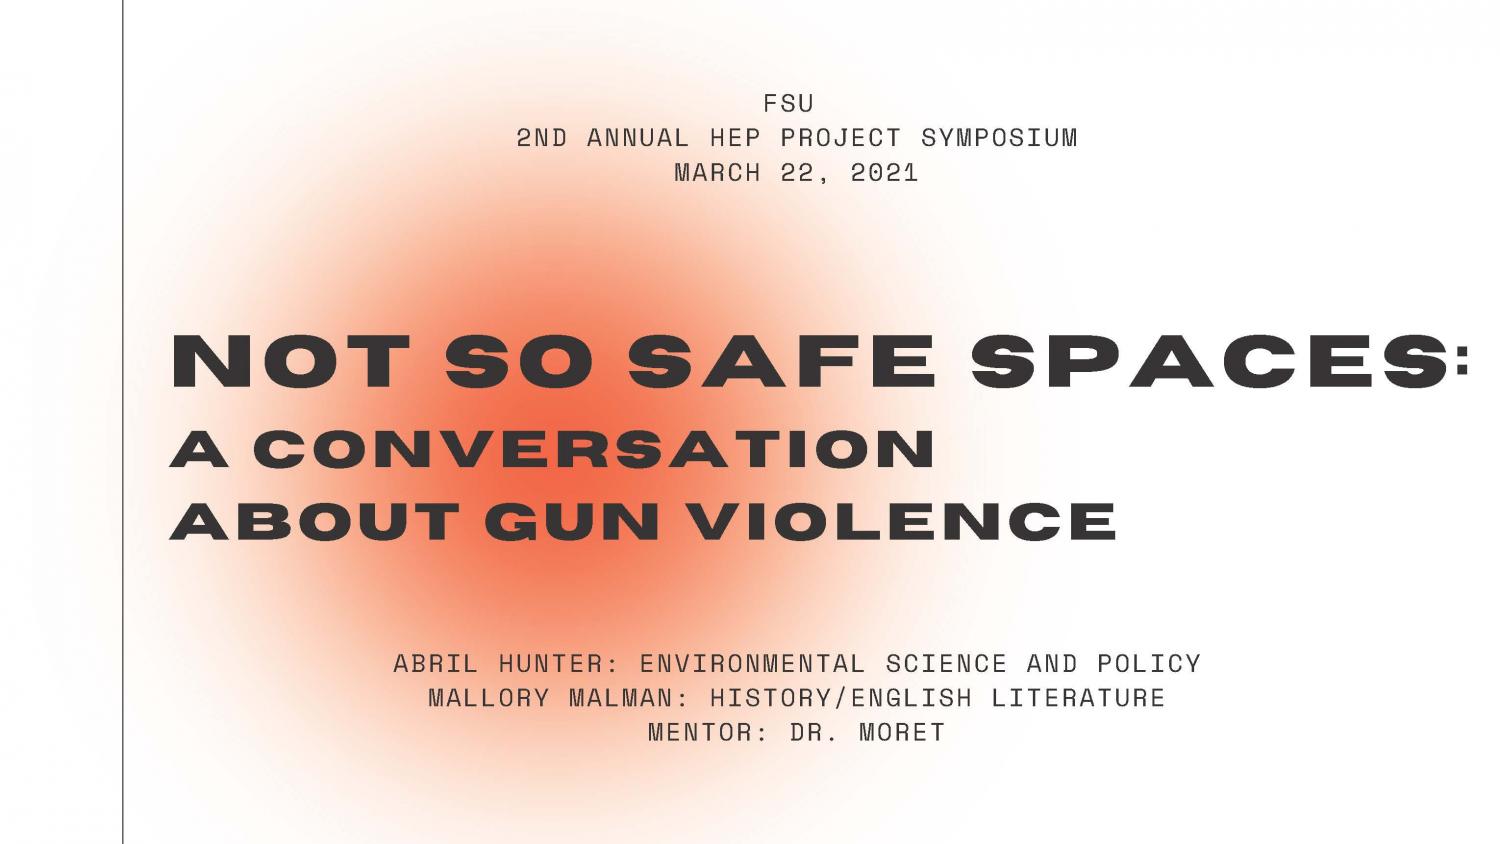 Abril Hunter and Mallory Malman's PowerPoint presentation on "Not So Safe Spaces: A Conversation About Gun Violence" as part of the Intersectional Identities panel of the Spring 2021 HEP Symposium. Image link to full PowerPoint slide presentation. No audio.